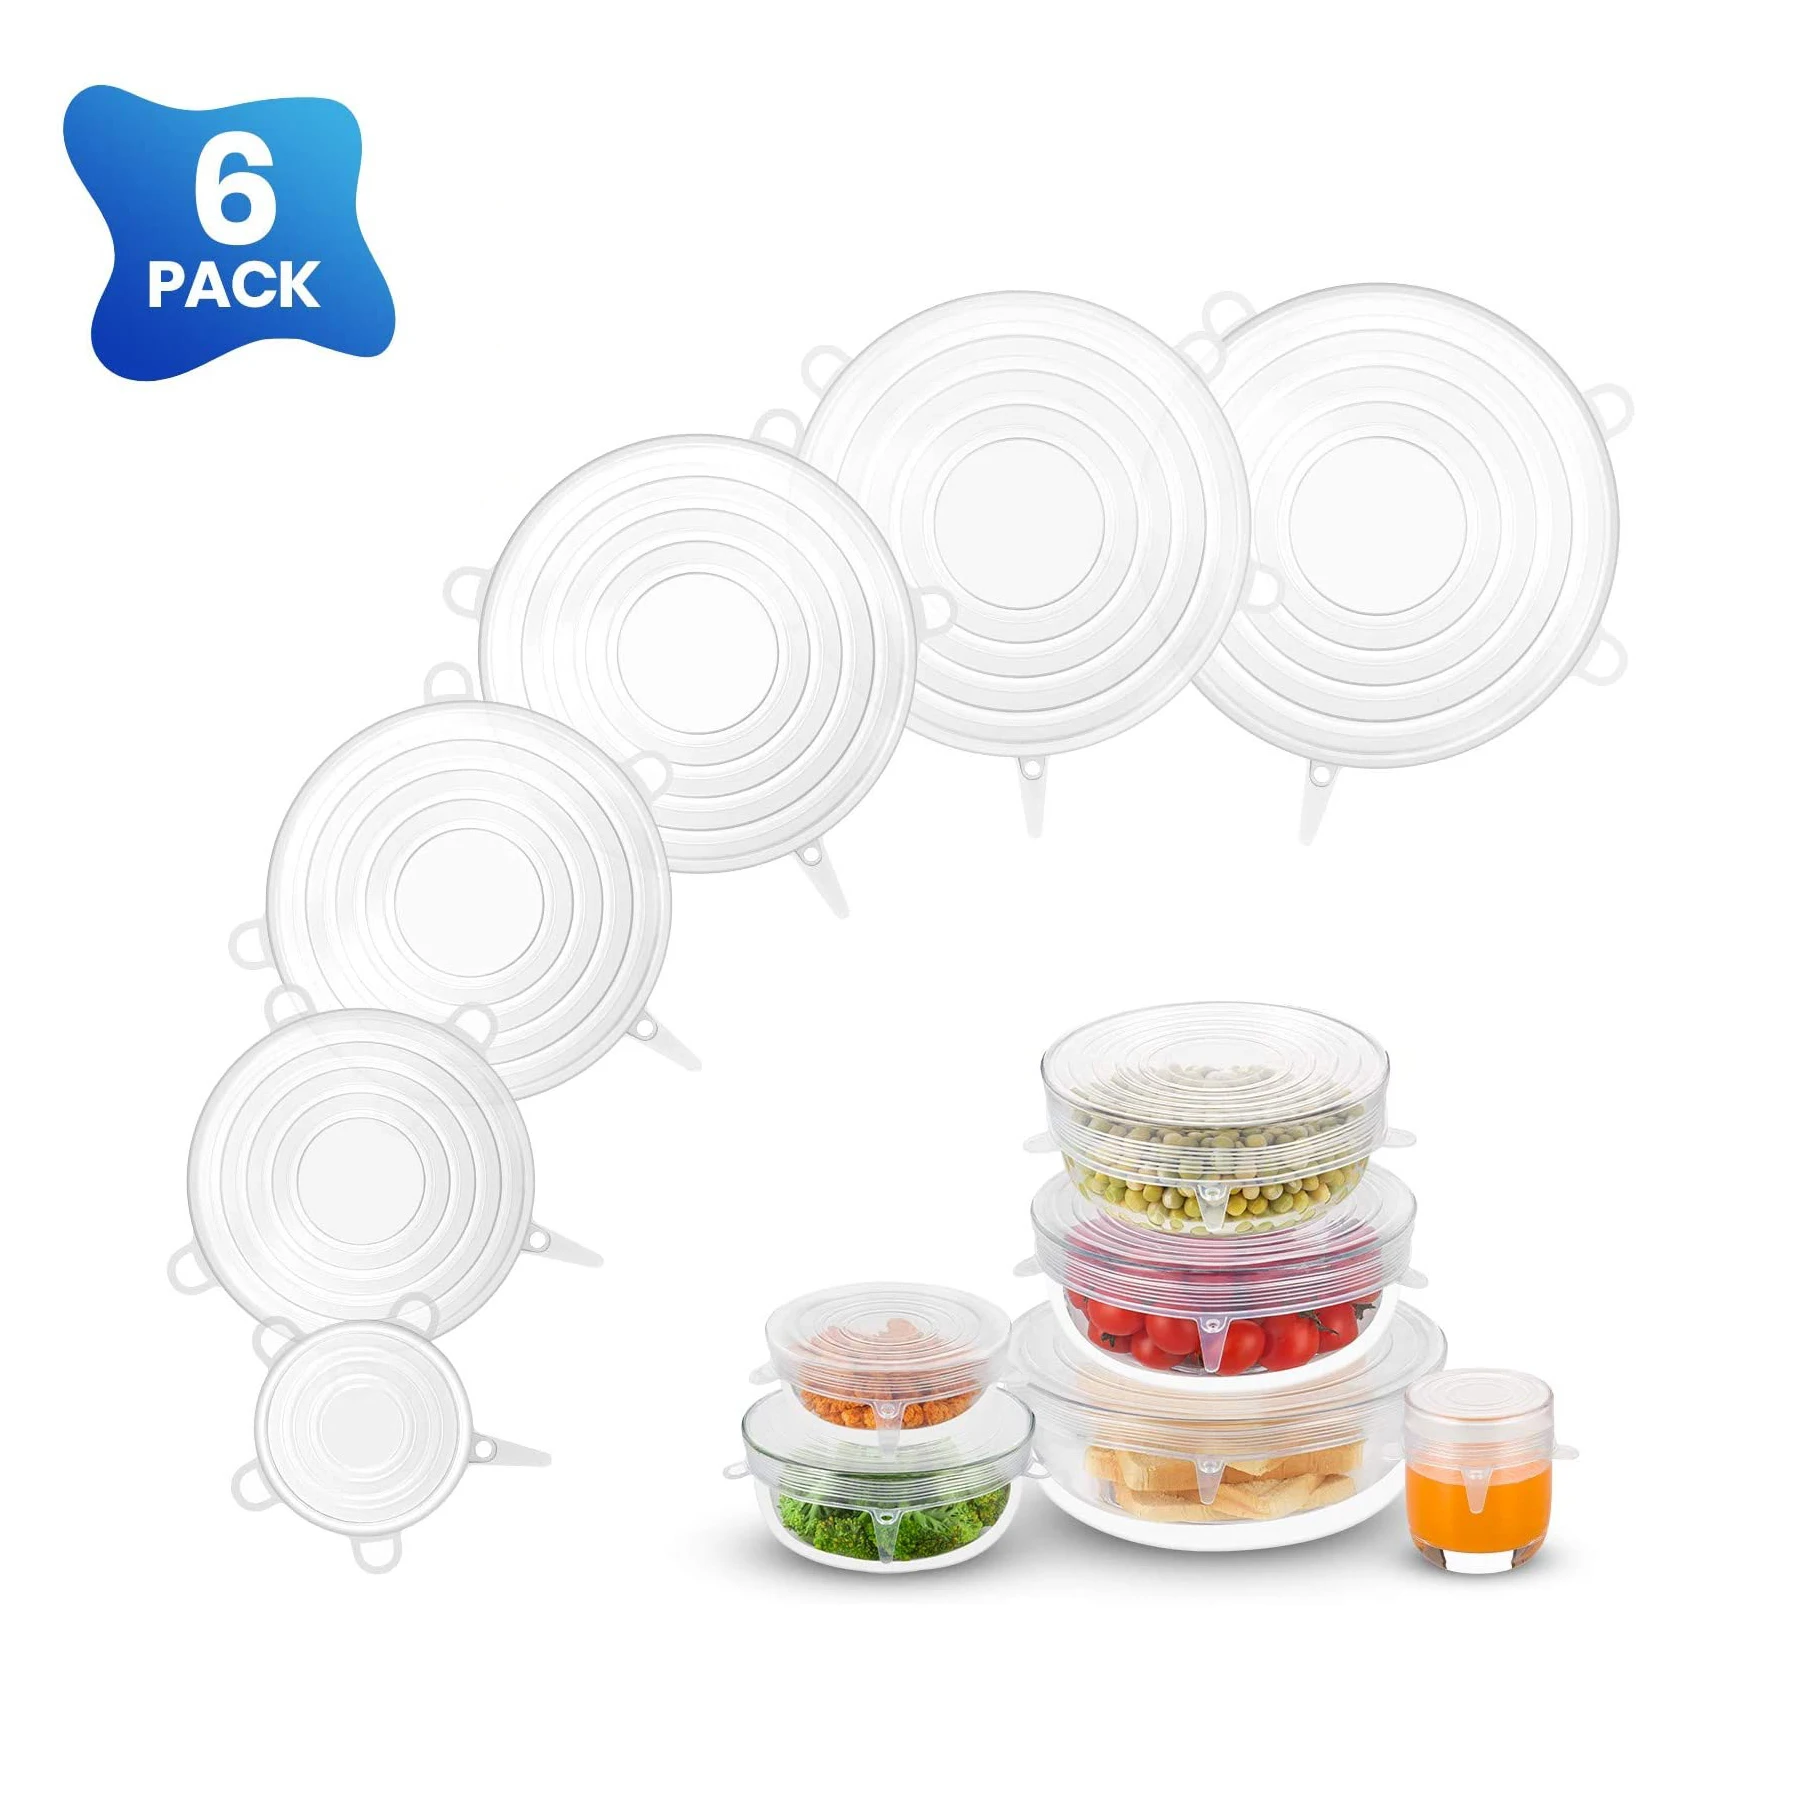 6pcs Set Food Save Cover NEW Zero-Waste Reusable Food and Container Lids 